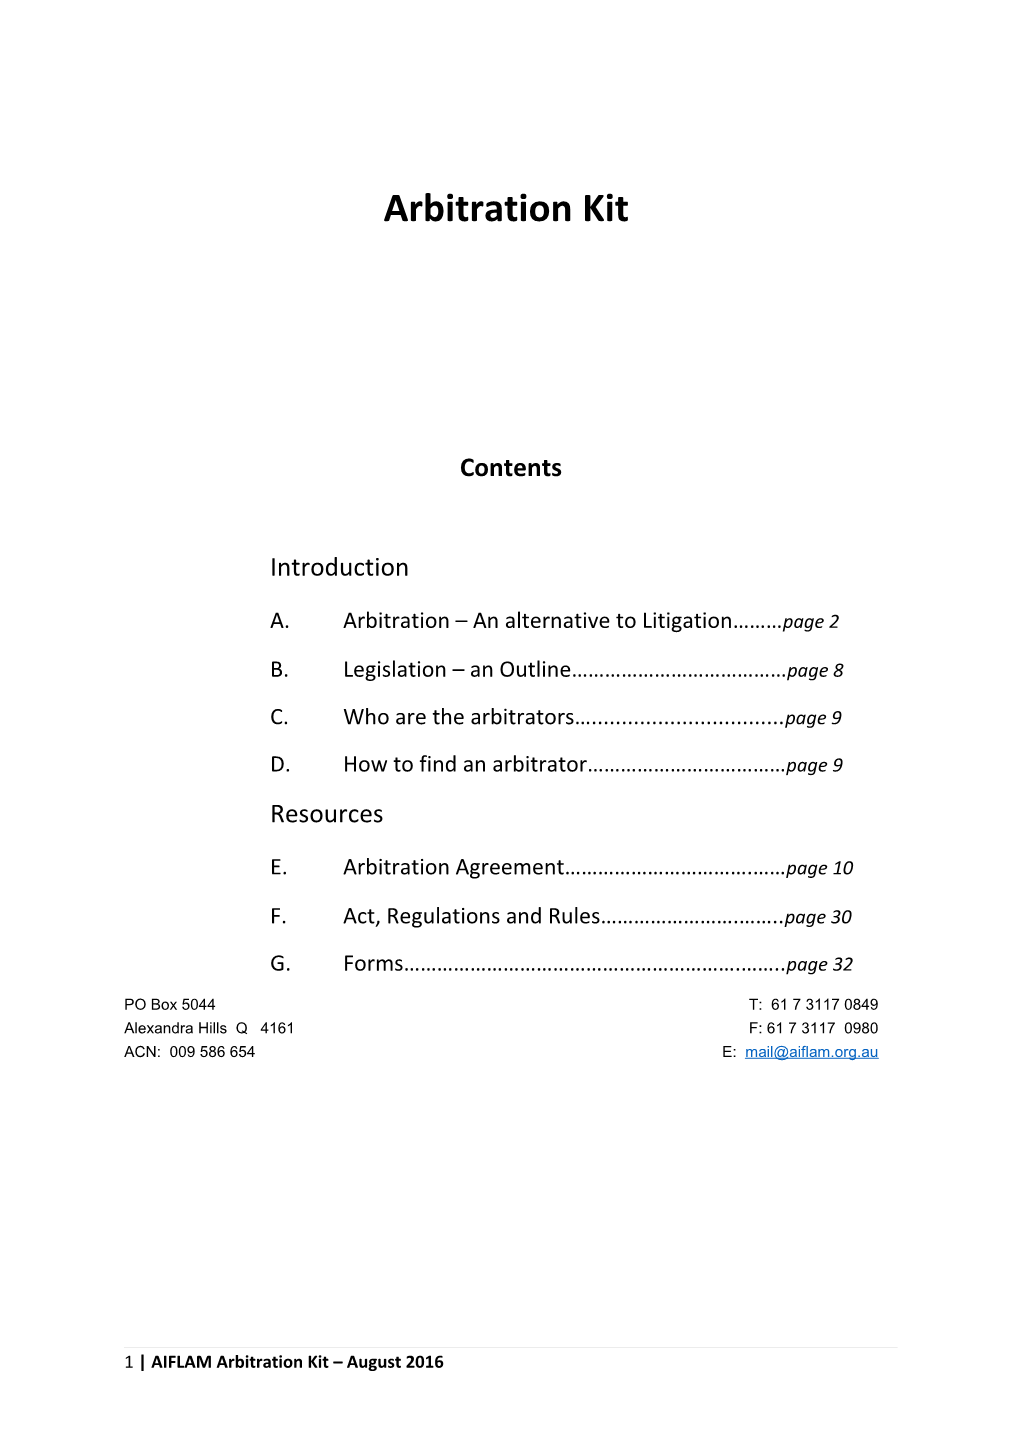 A.Arbitration an Alternative to Litigation Page 2